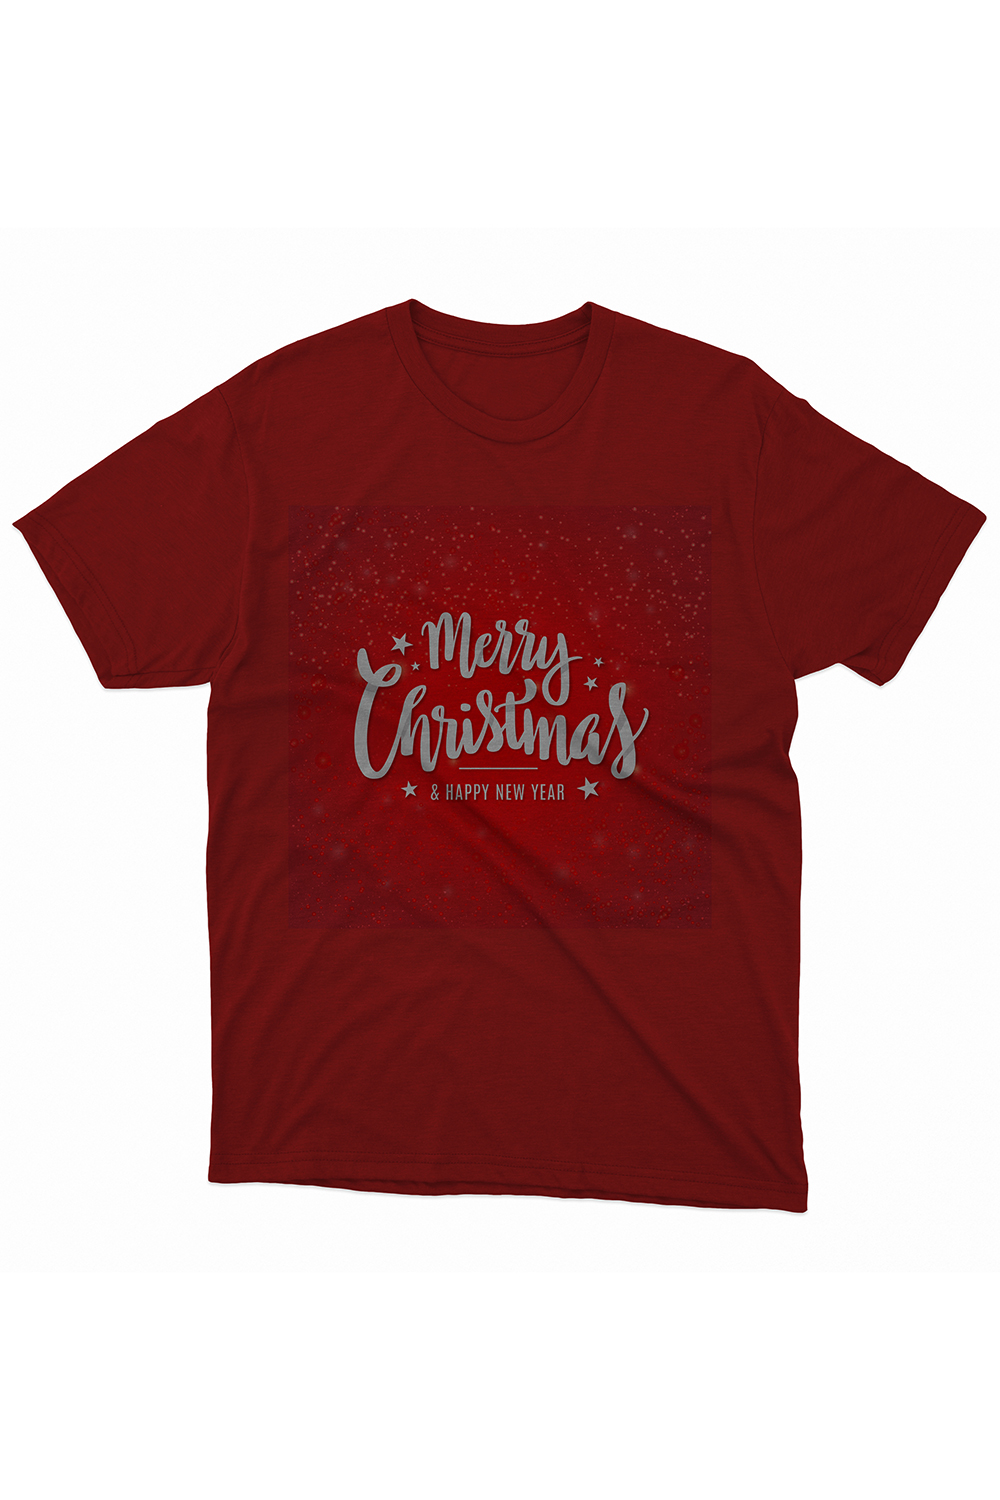 Typography Christmas T- shirts Designs pinterest image.